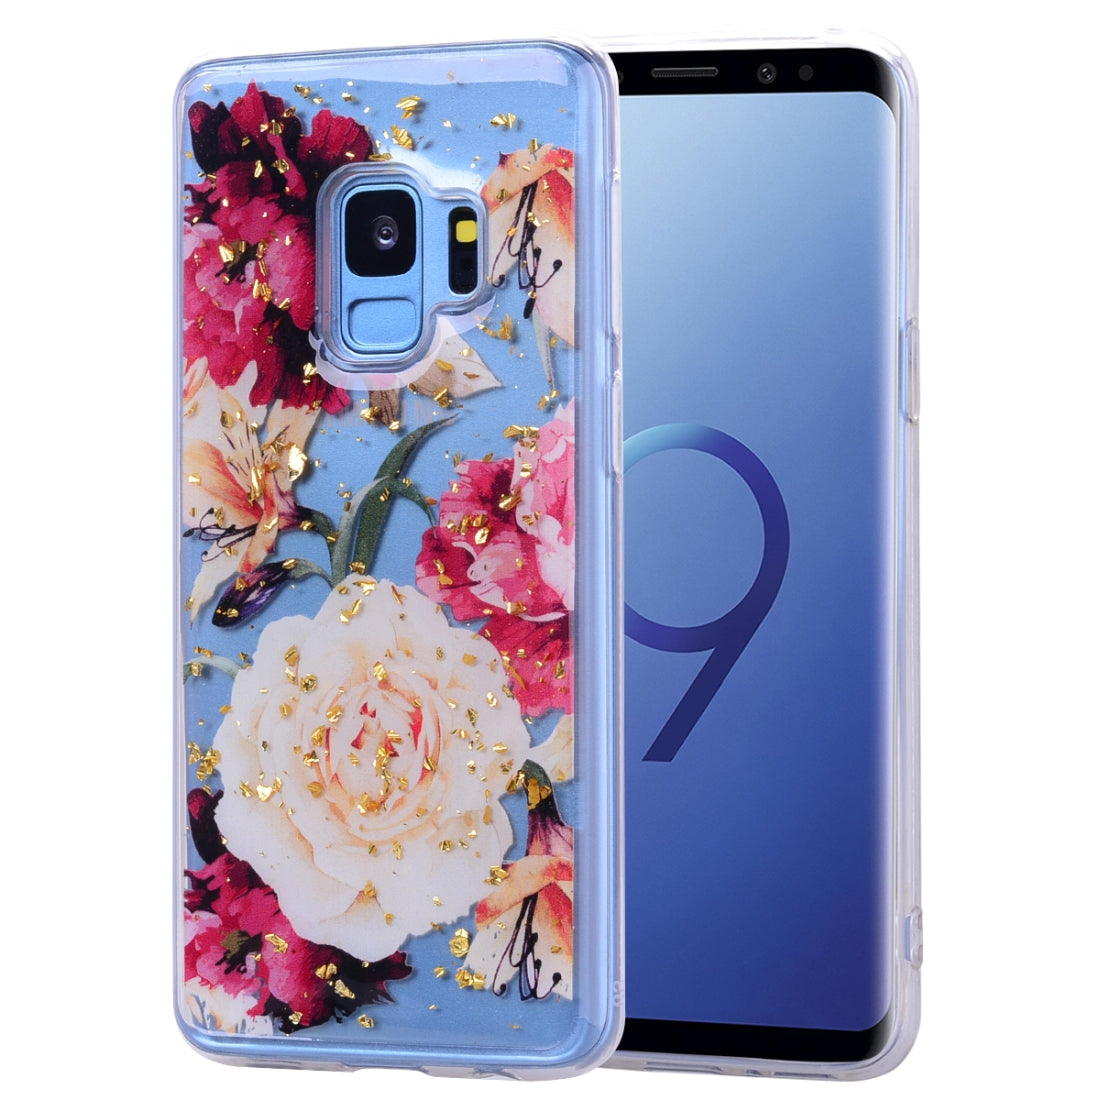 Cartoon Pattern Gold Foil Style Dropping Glue TPU Soft Protective Case for Galaxy S9+(Flower)